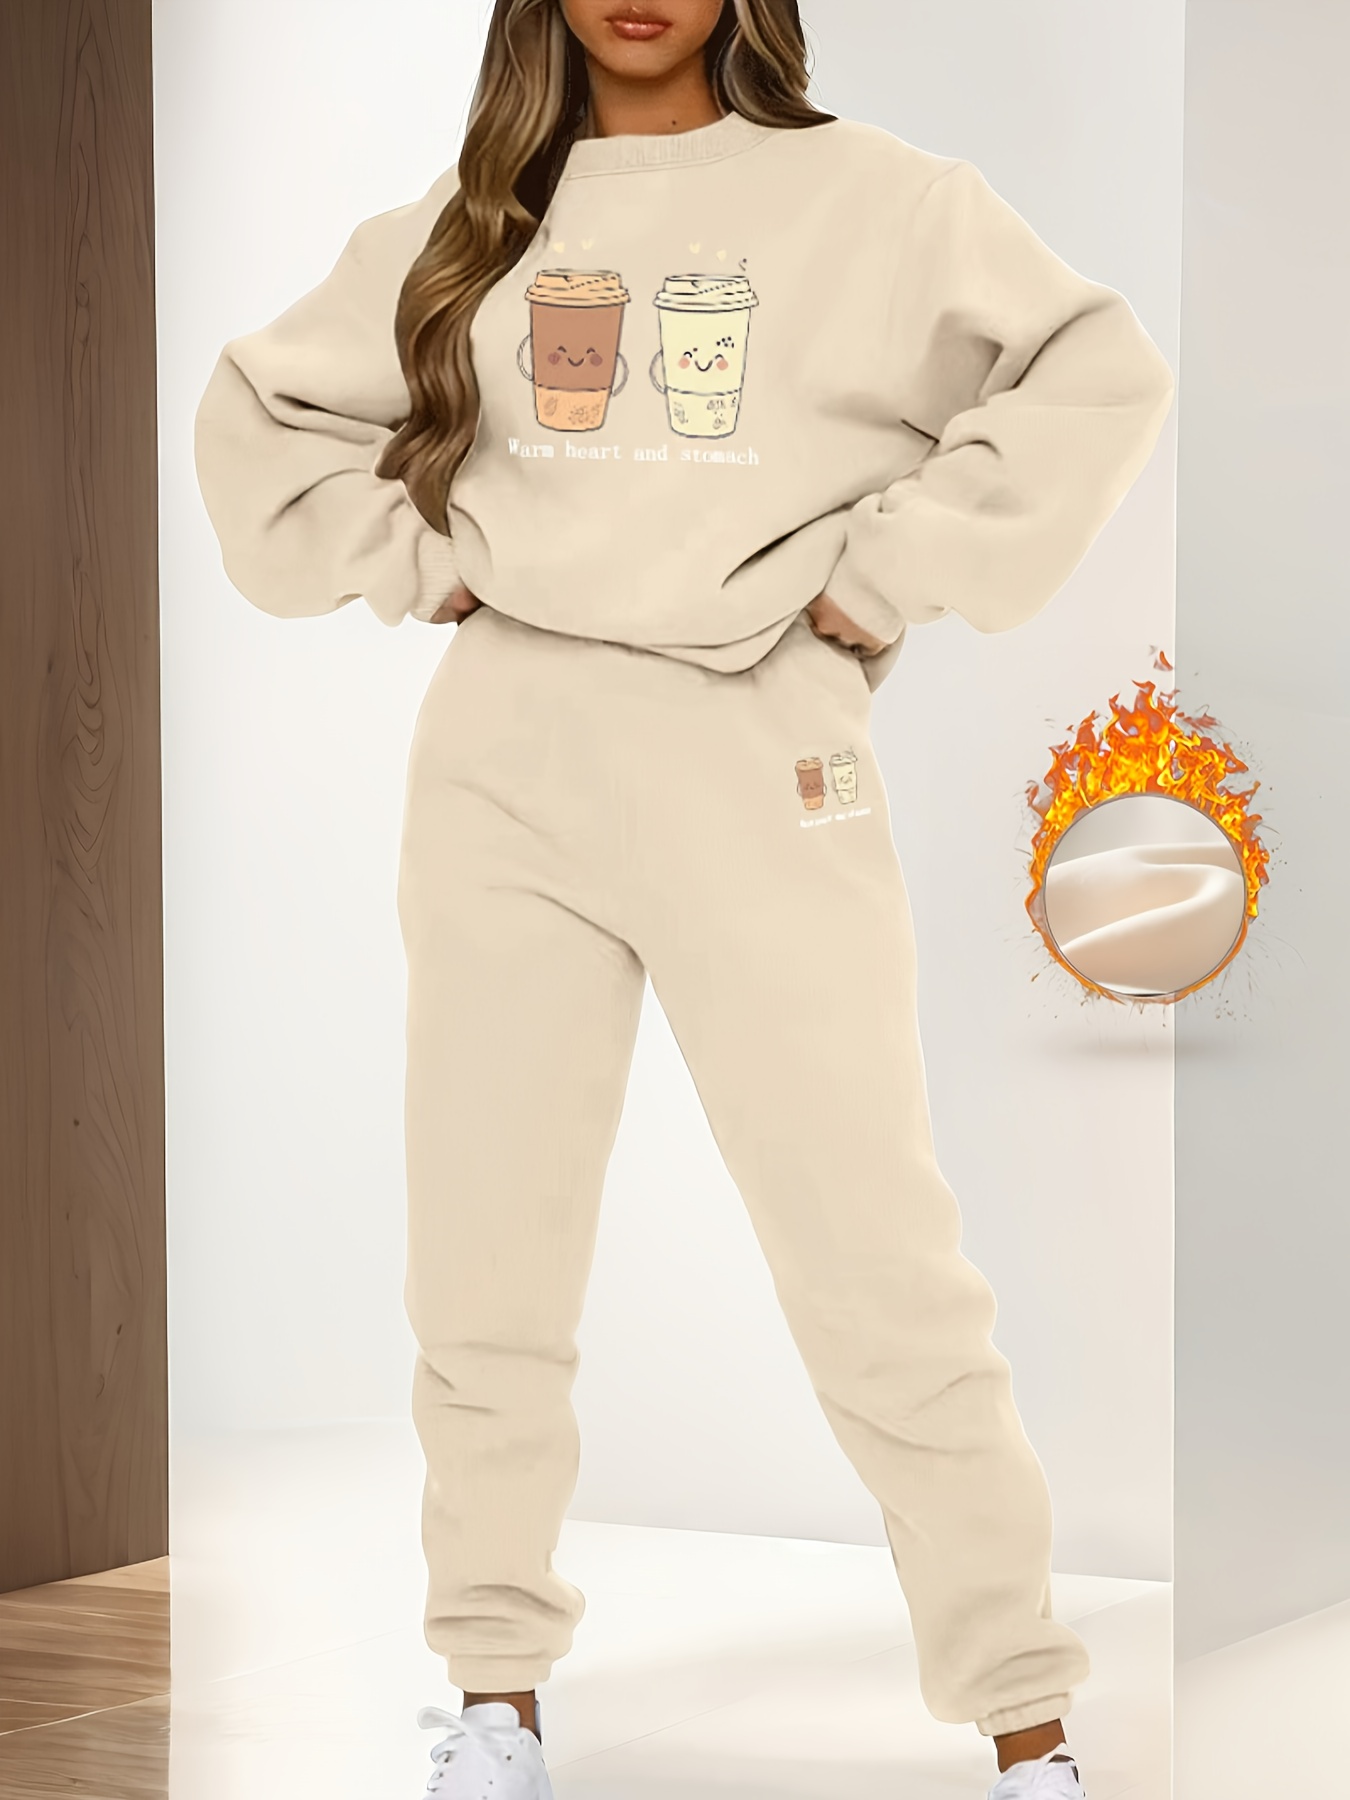 Hoodie and Jogger Set -  Canada